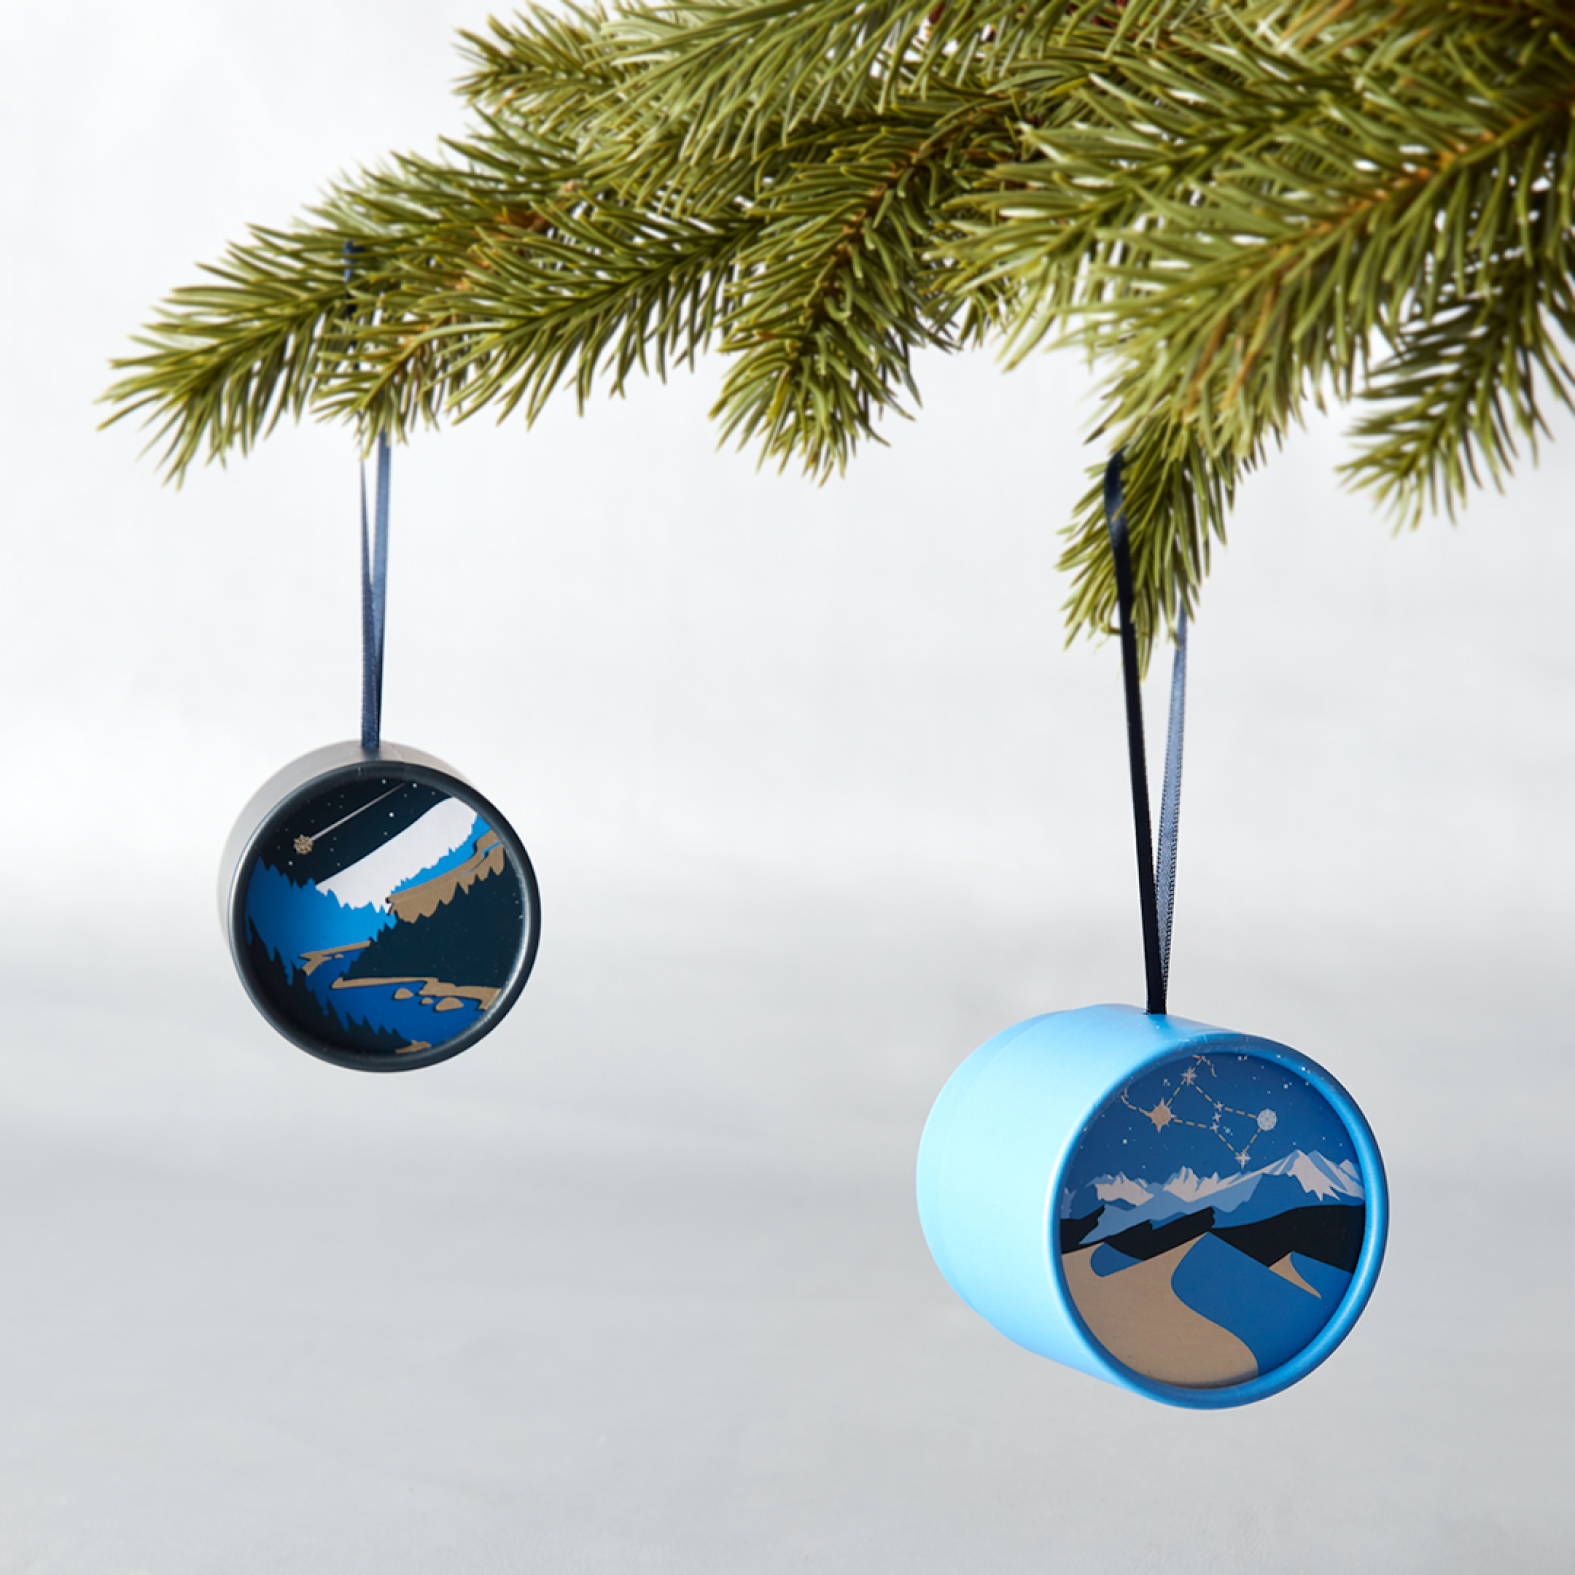 Advent Calendar ornaments hanging from a tree